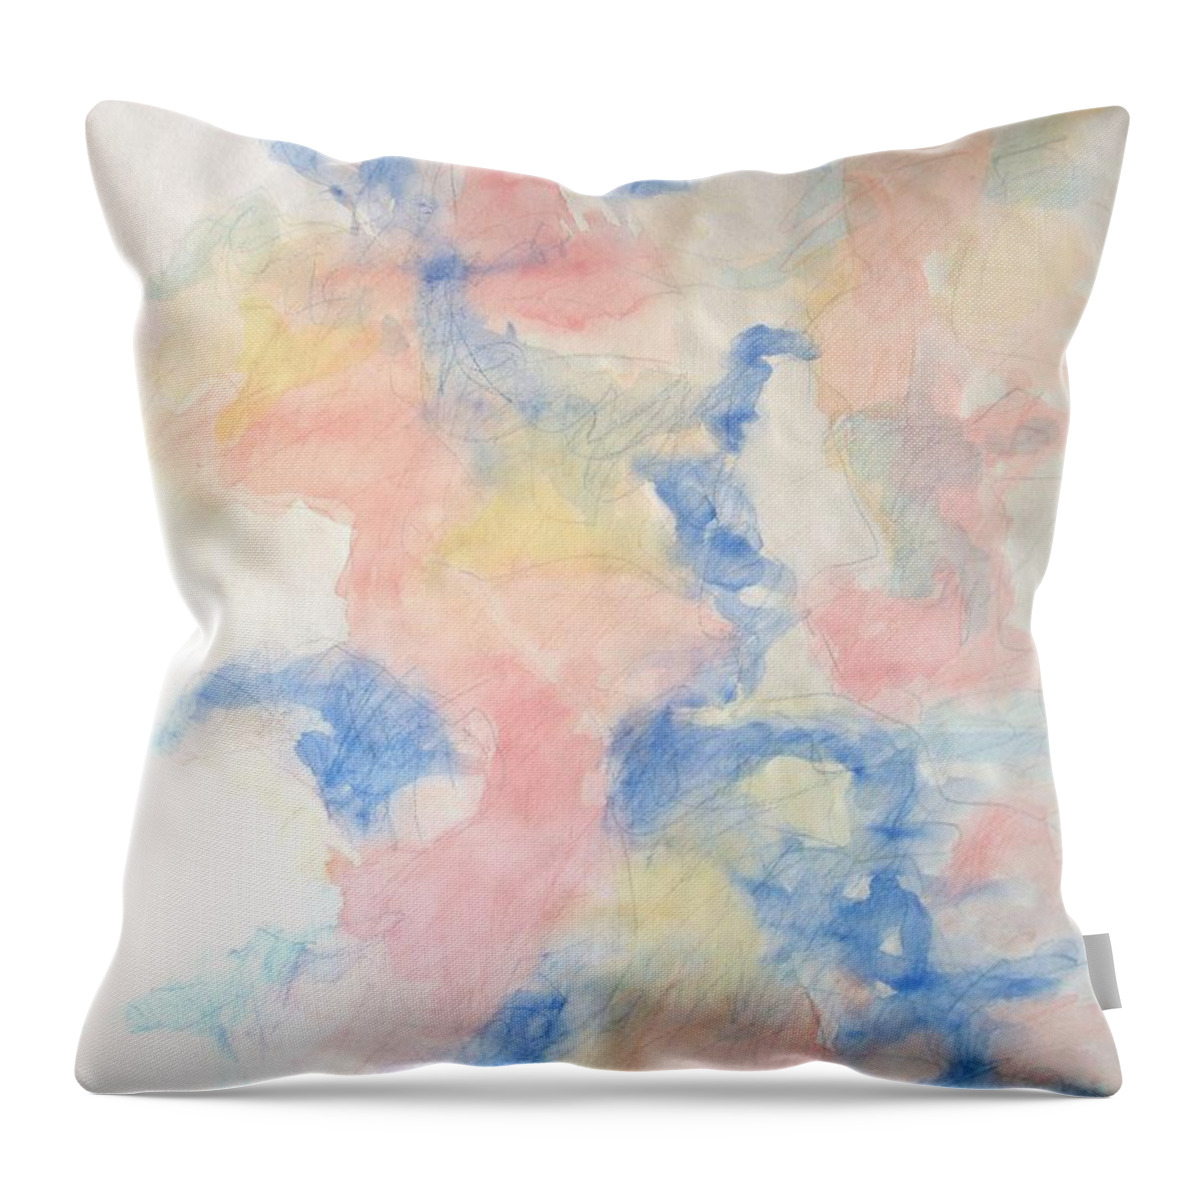 Springtime Springs Throw Pillow featuring the painting Springtime Springs by Esther Newman-Cohen